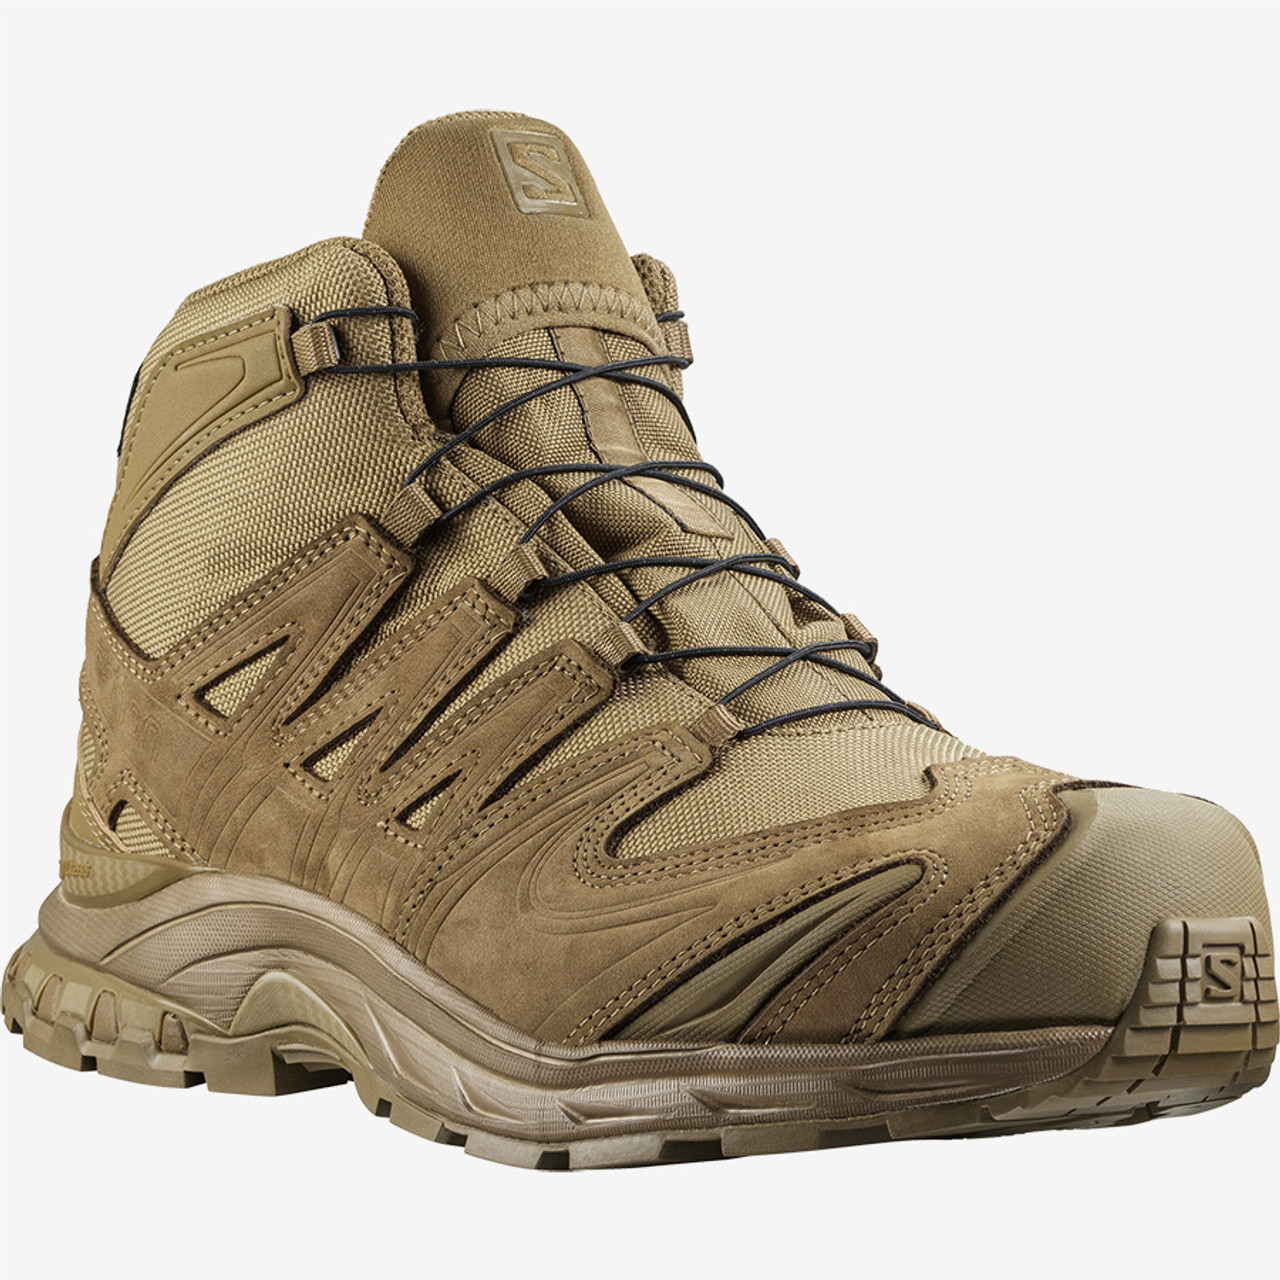 Salomon L40977900 XA Forces MID GTX Unisex 5 inch Boots, Lightweight, Uniform or Casual, Waterproof, Coyote Brown